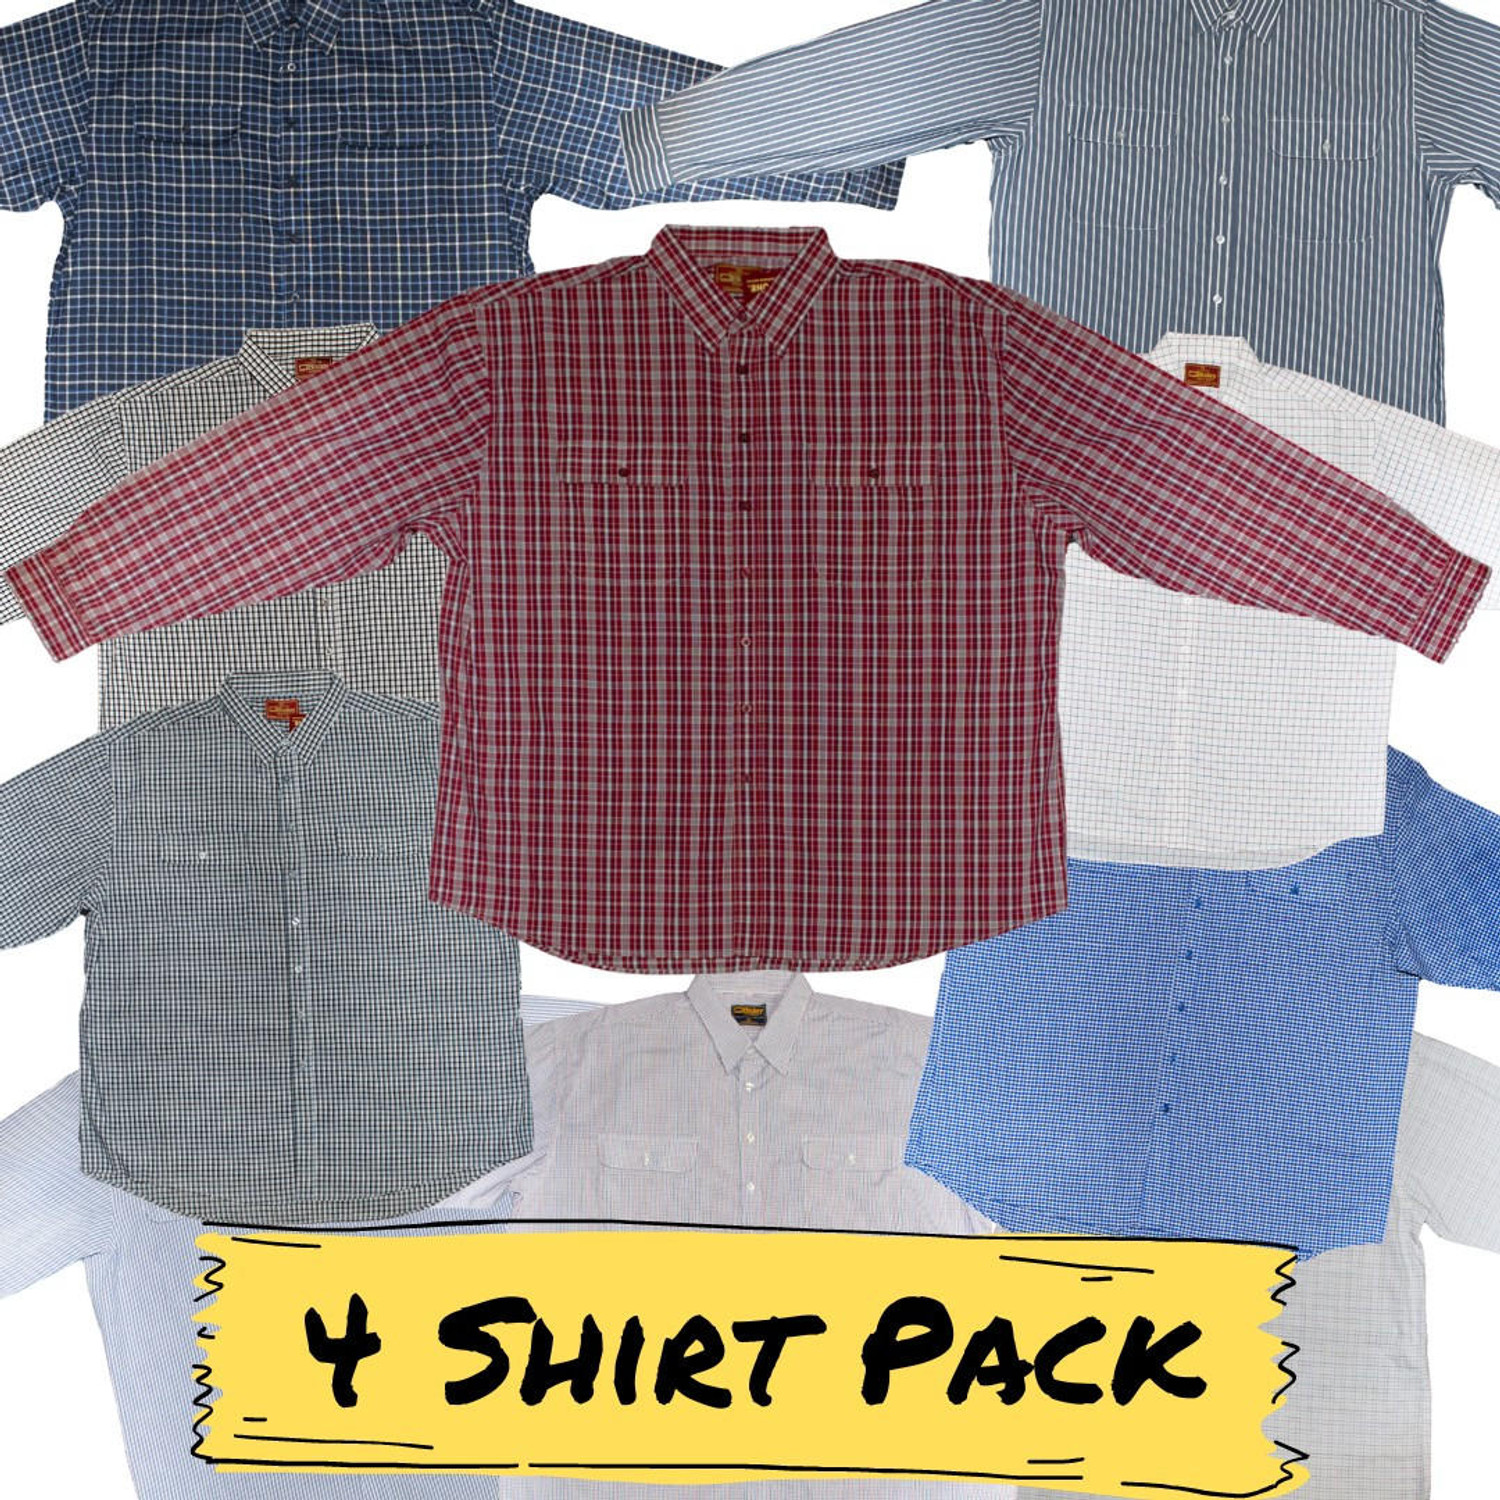  Bisley Double Pocket Work Shirts (Buy 4 Pack Shirts for $100) & Receive a Surprise Mix of Colours and Patterns! 